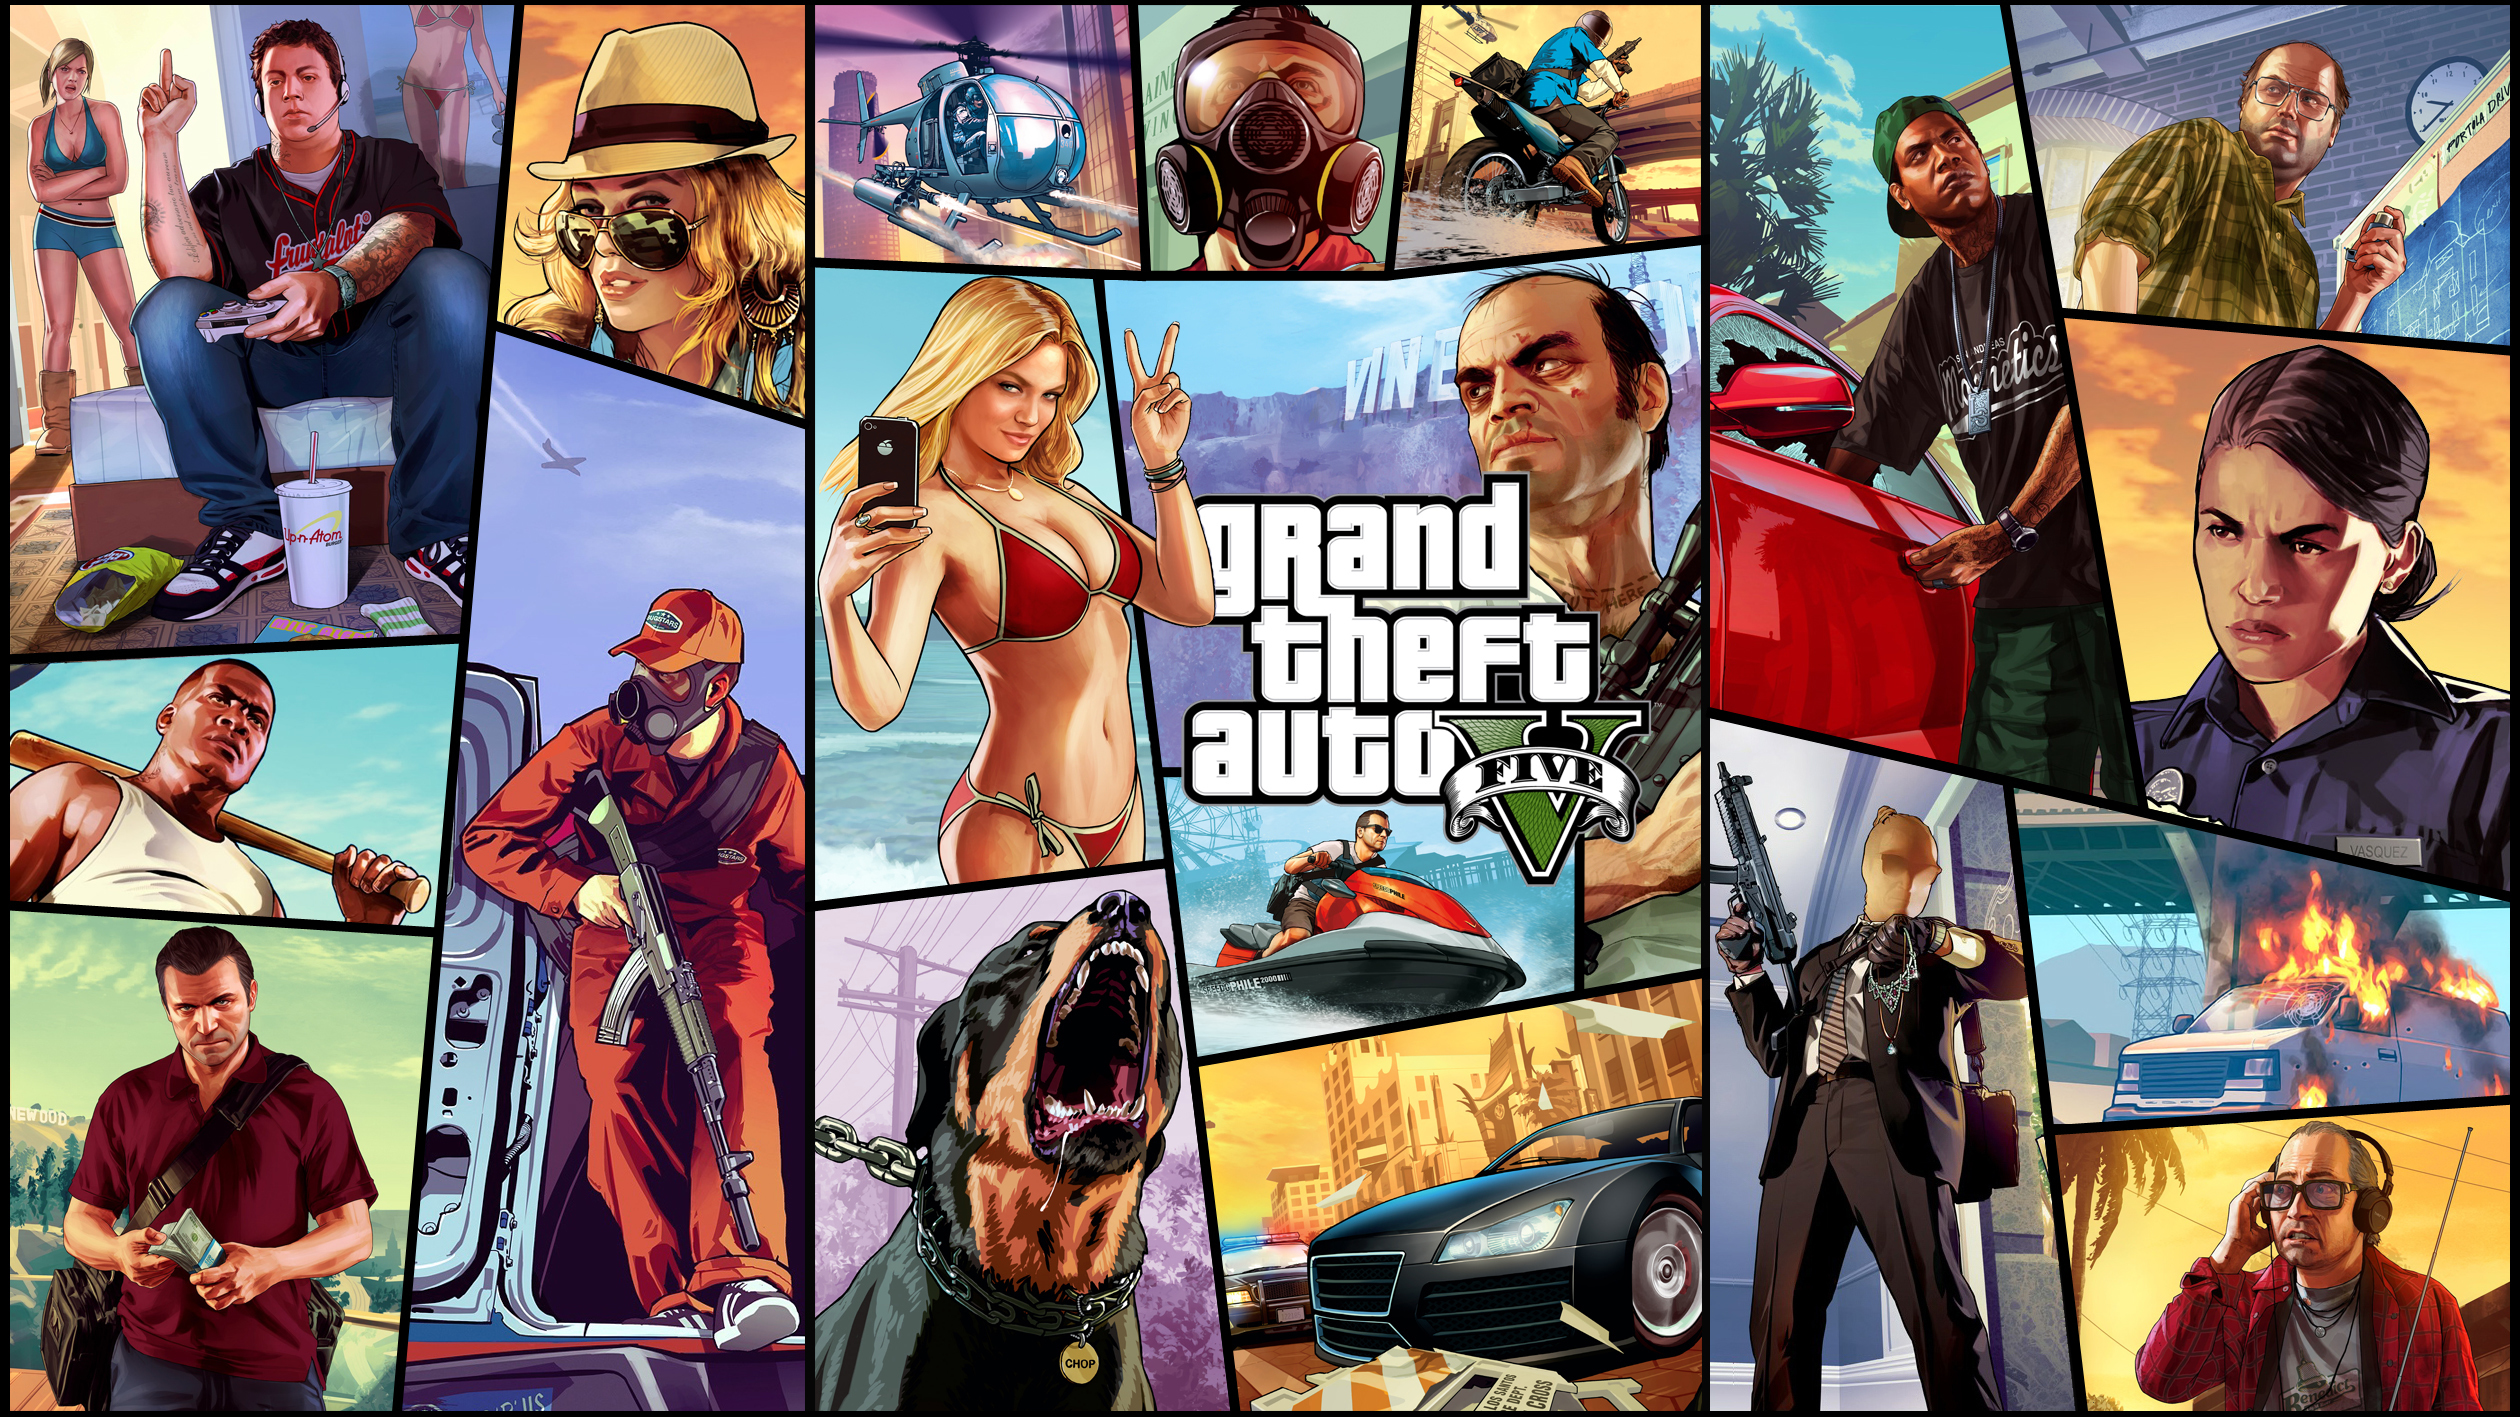 Grand Theft Auto V Game Posters 2520x1417